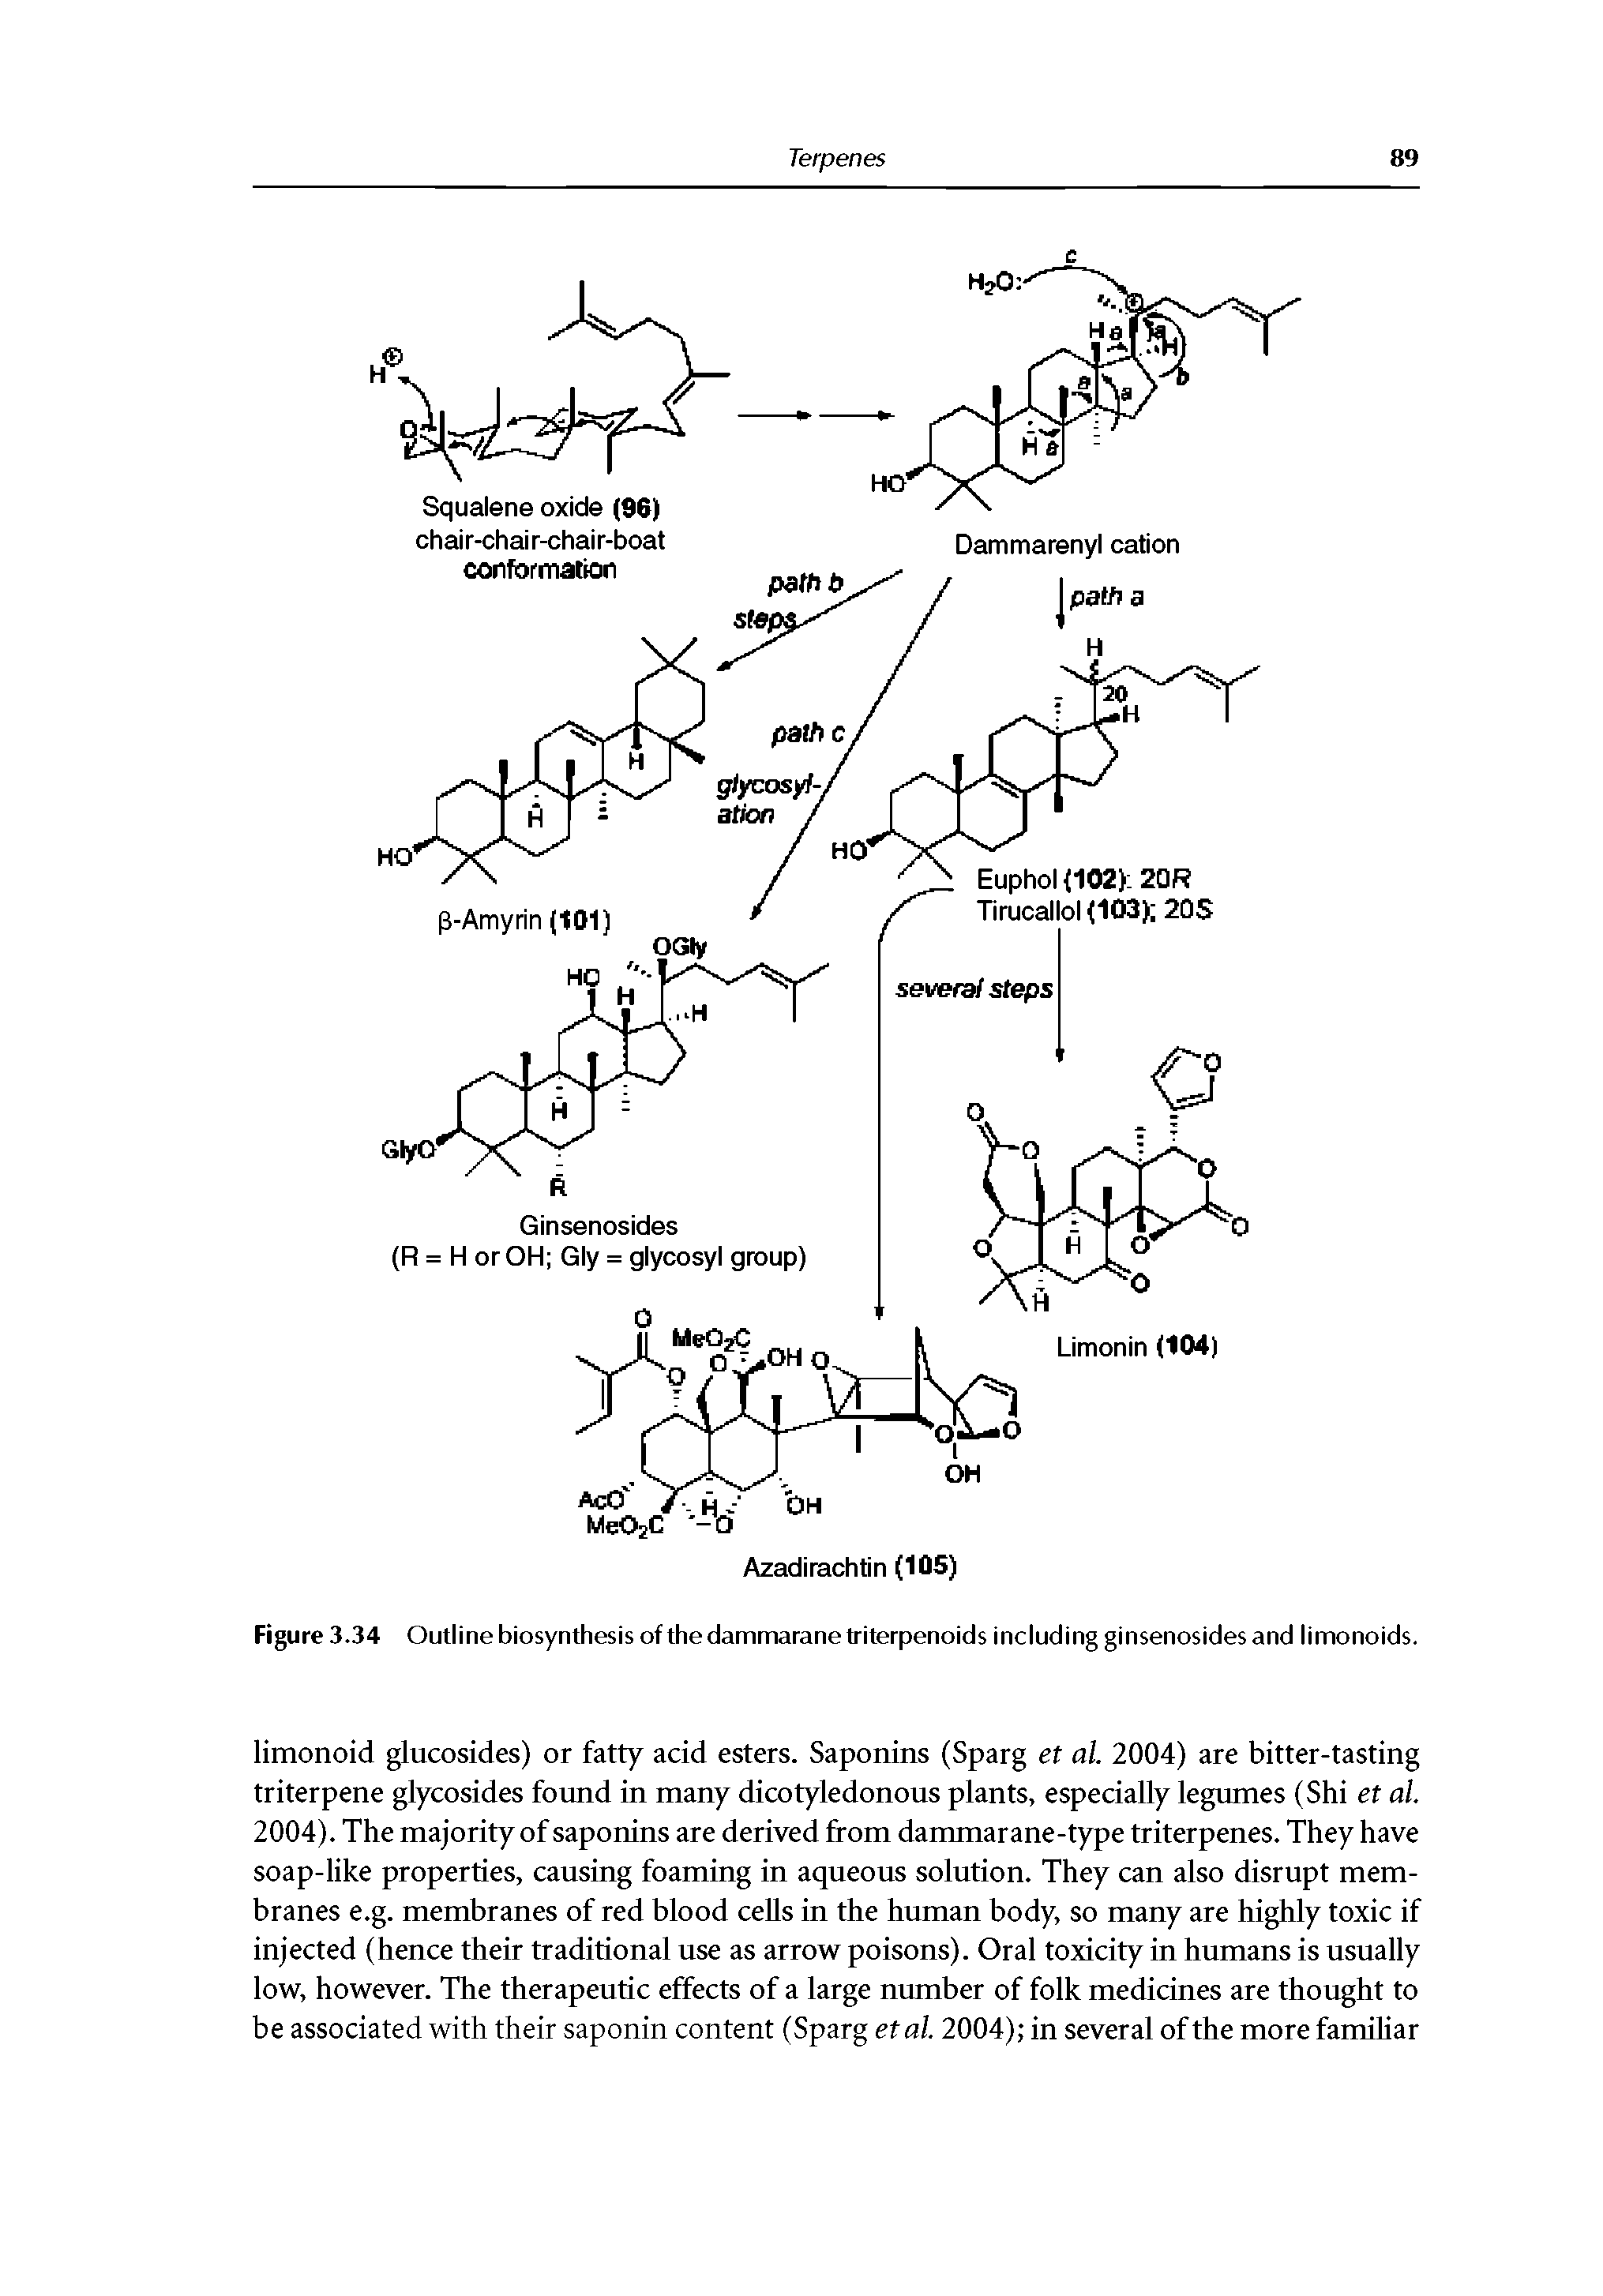 Figure 3.34 Outline biosynthesis of the dammarane triterpenoids including ginsenosides and limonoids.